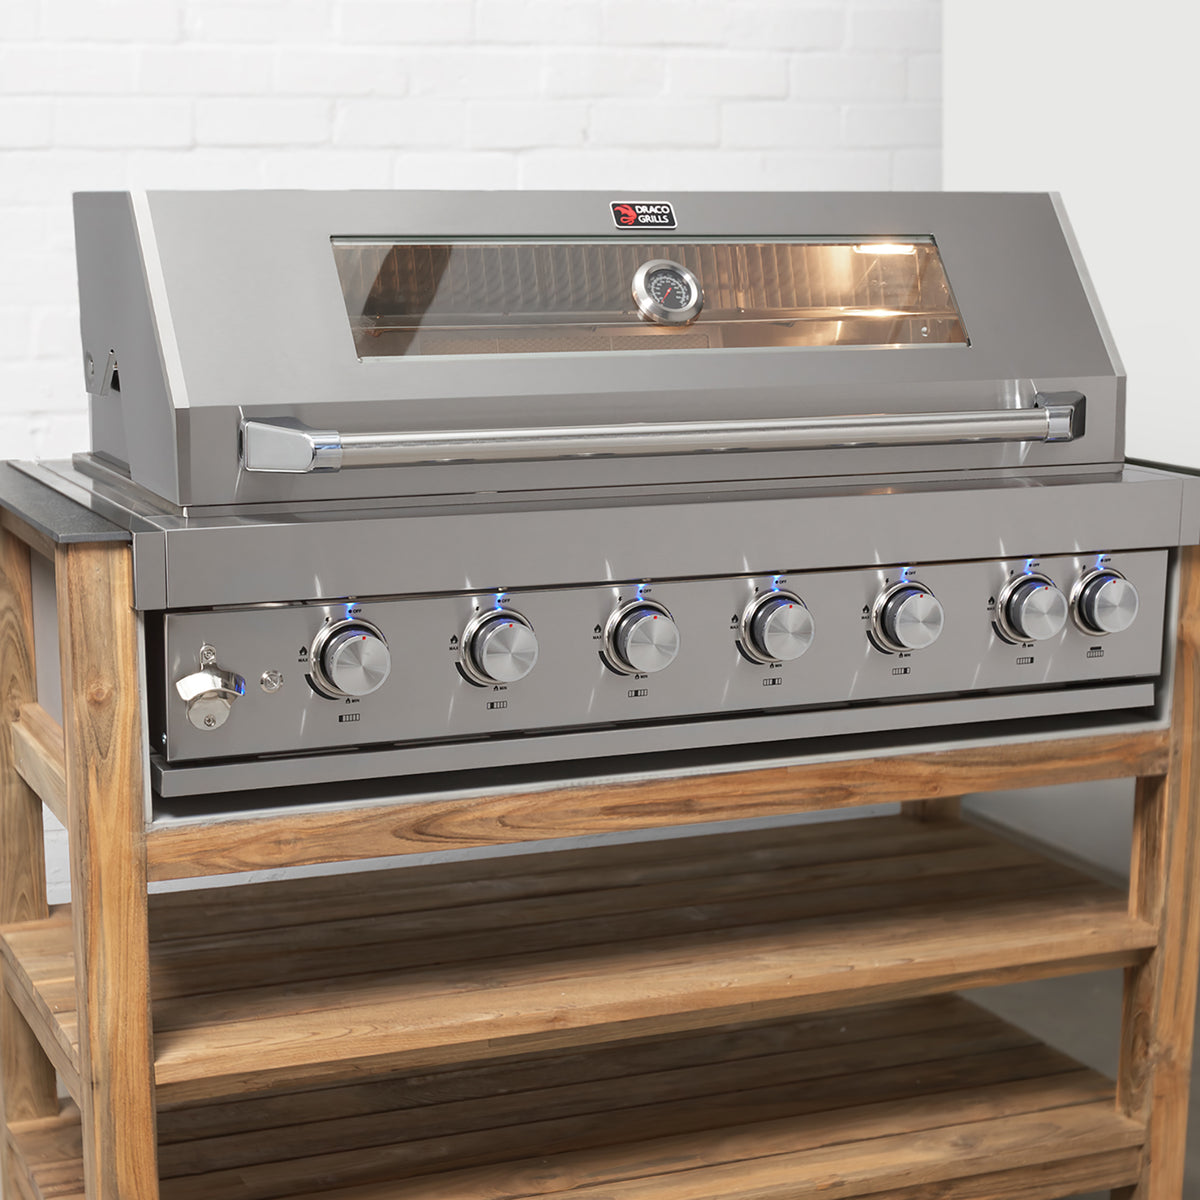 Draco Grills Z640B Deluxe 6 Burner Stainless Steel Build in Gas Barbecue